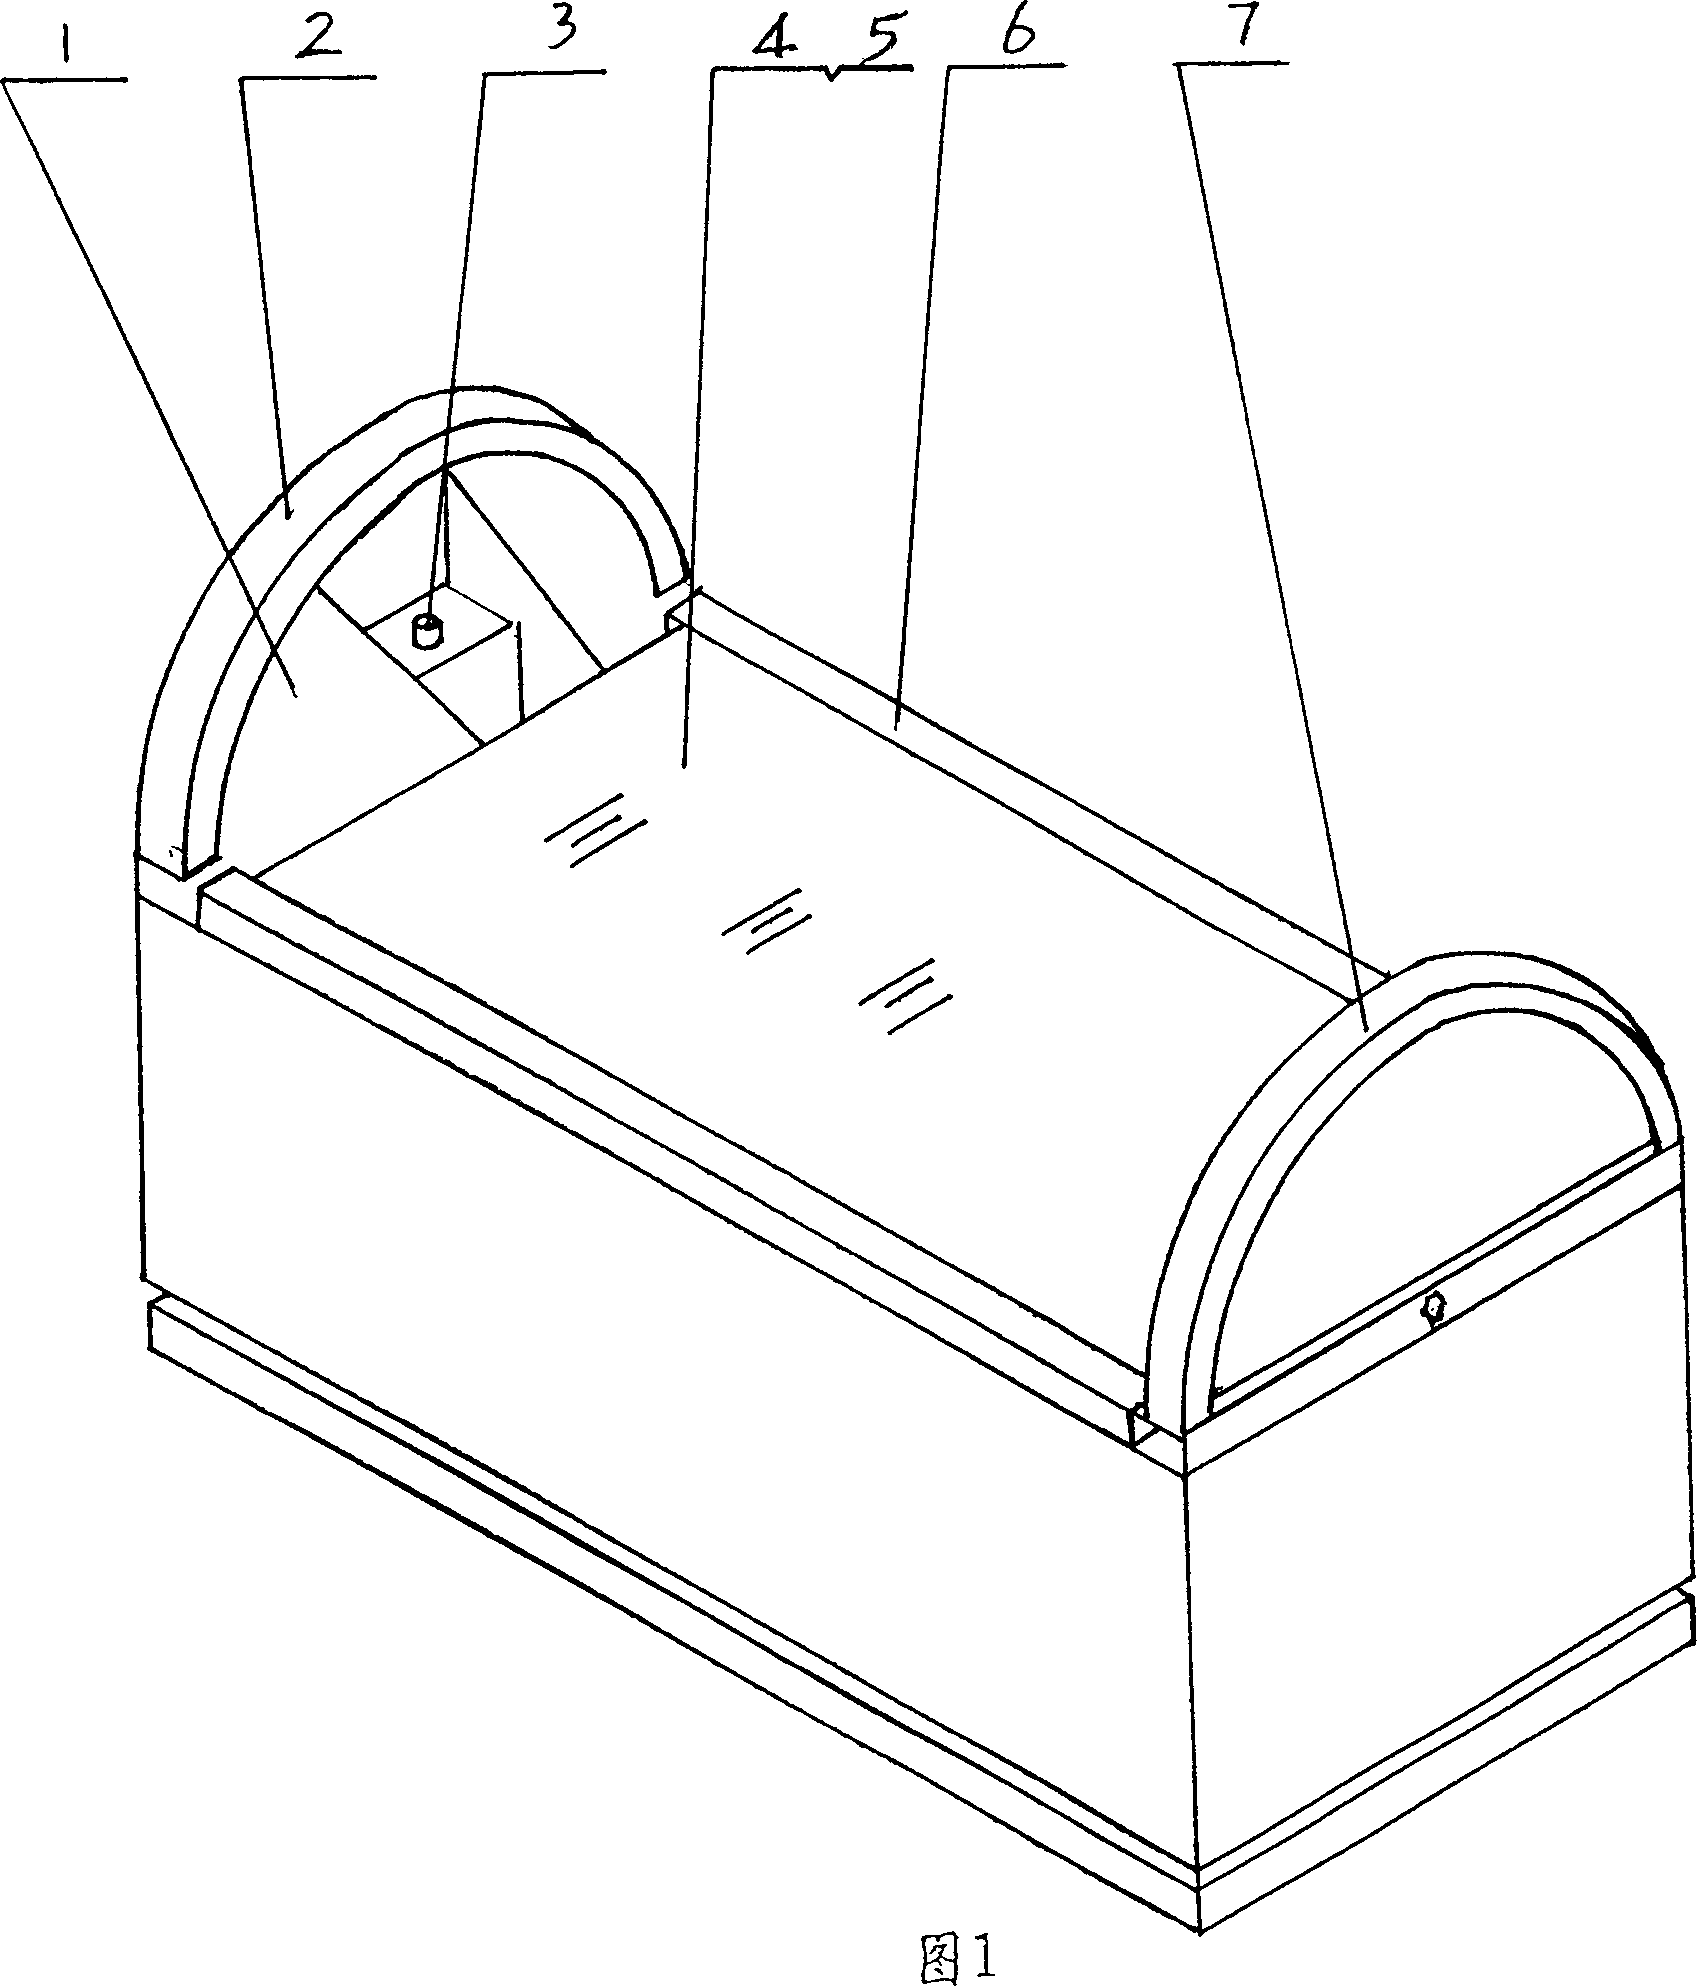 Fall-automatic earthquake resistance safe bed